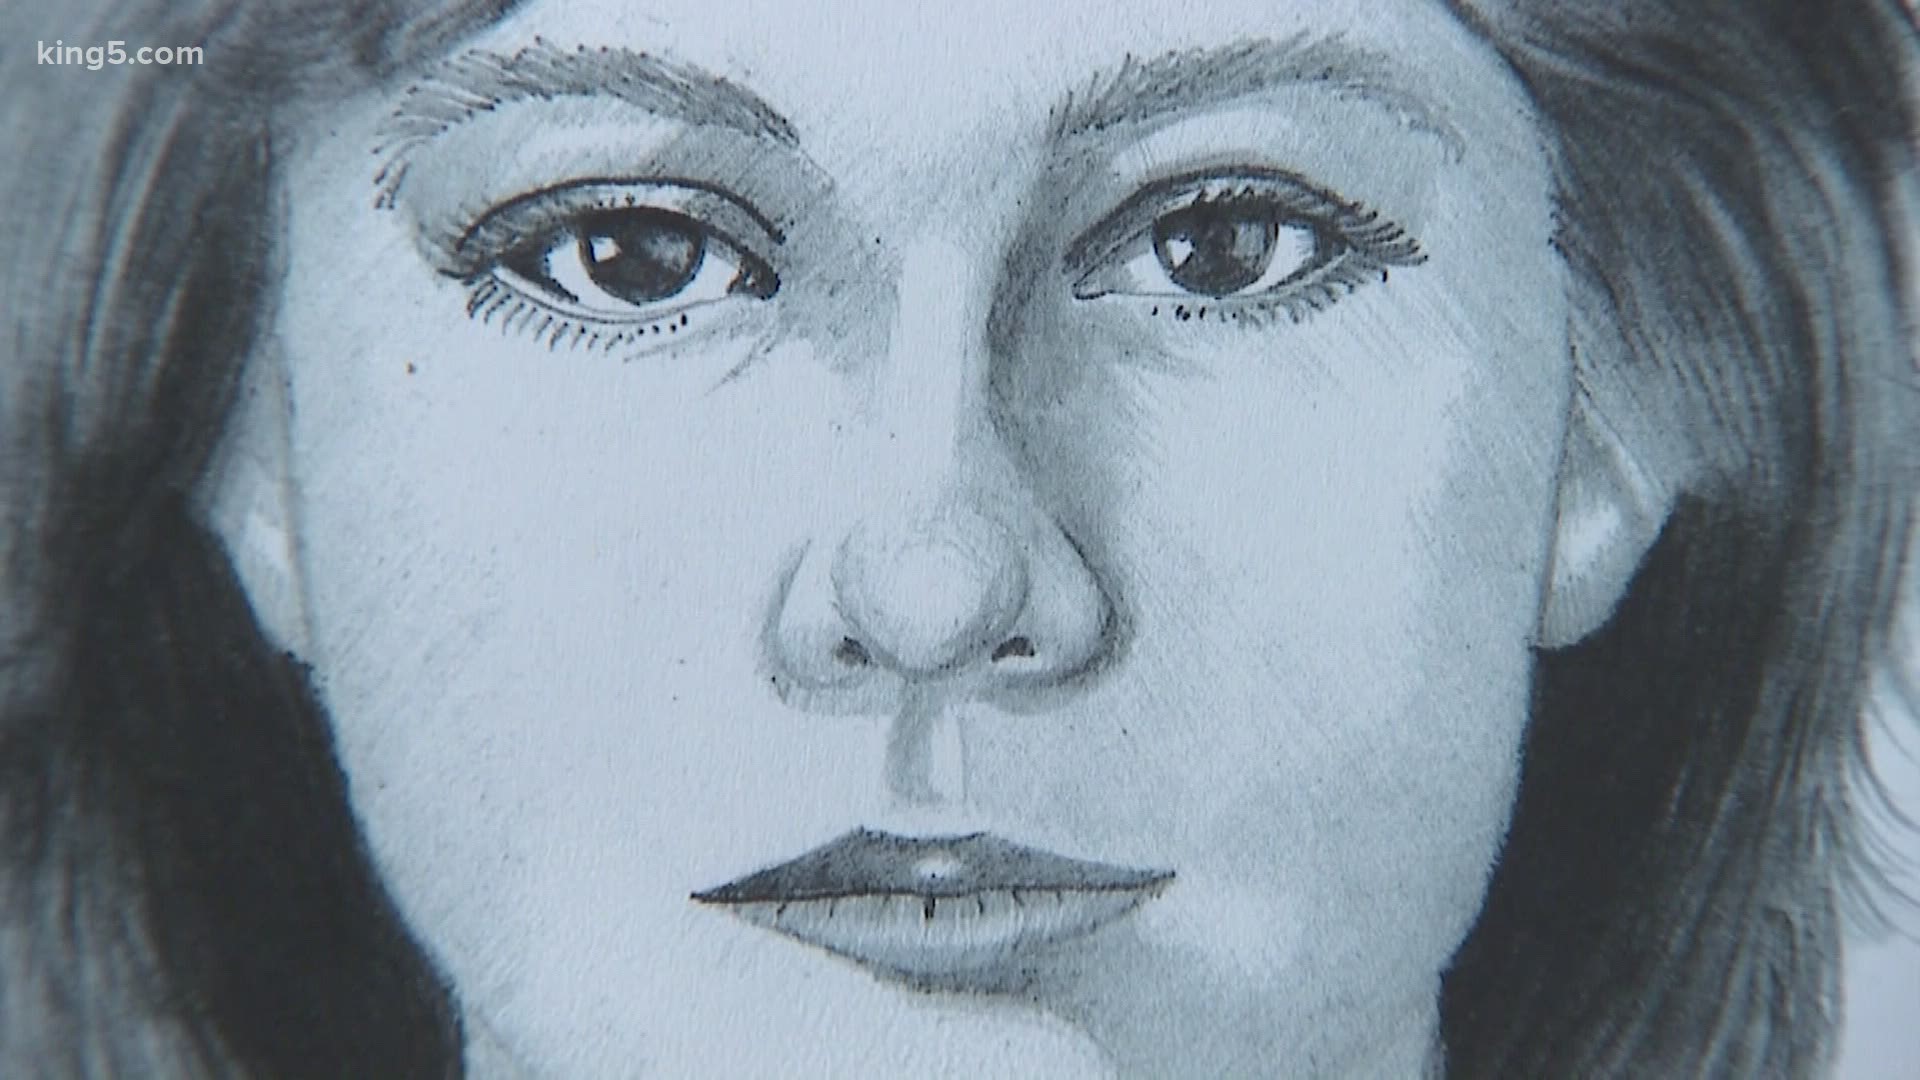 A ‘Precious Jane Doe’ 1977 Everett murder victim was identified using a new scientific technique previously thought to be impossible.